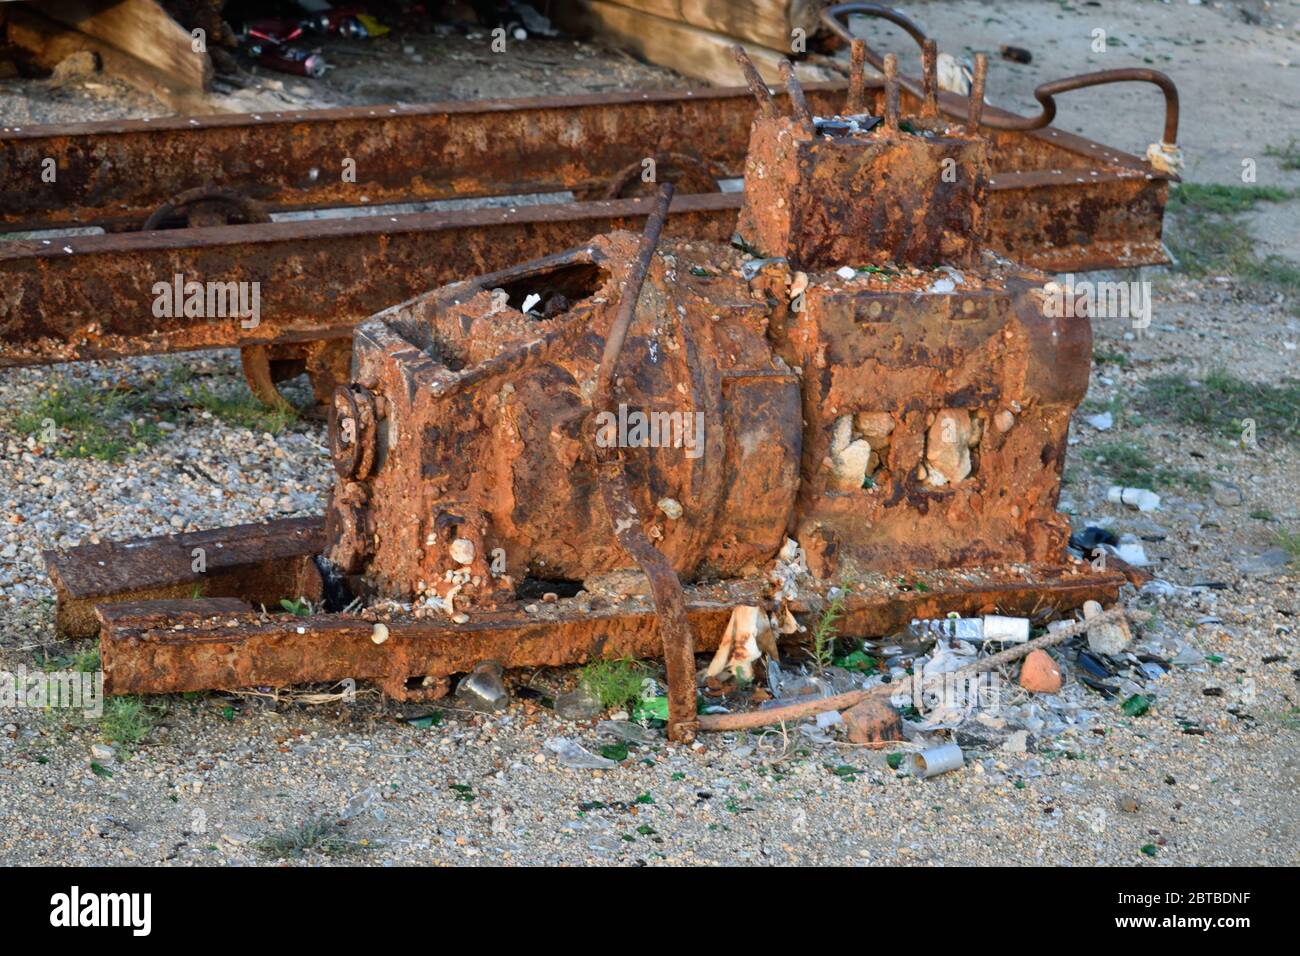 Rusty Piece of Old Machinery Lies Among Rubbish Outside the Abandoned Fish Factory on Olkhon Island, Lake Baikal, Russia Stock Photo